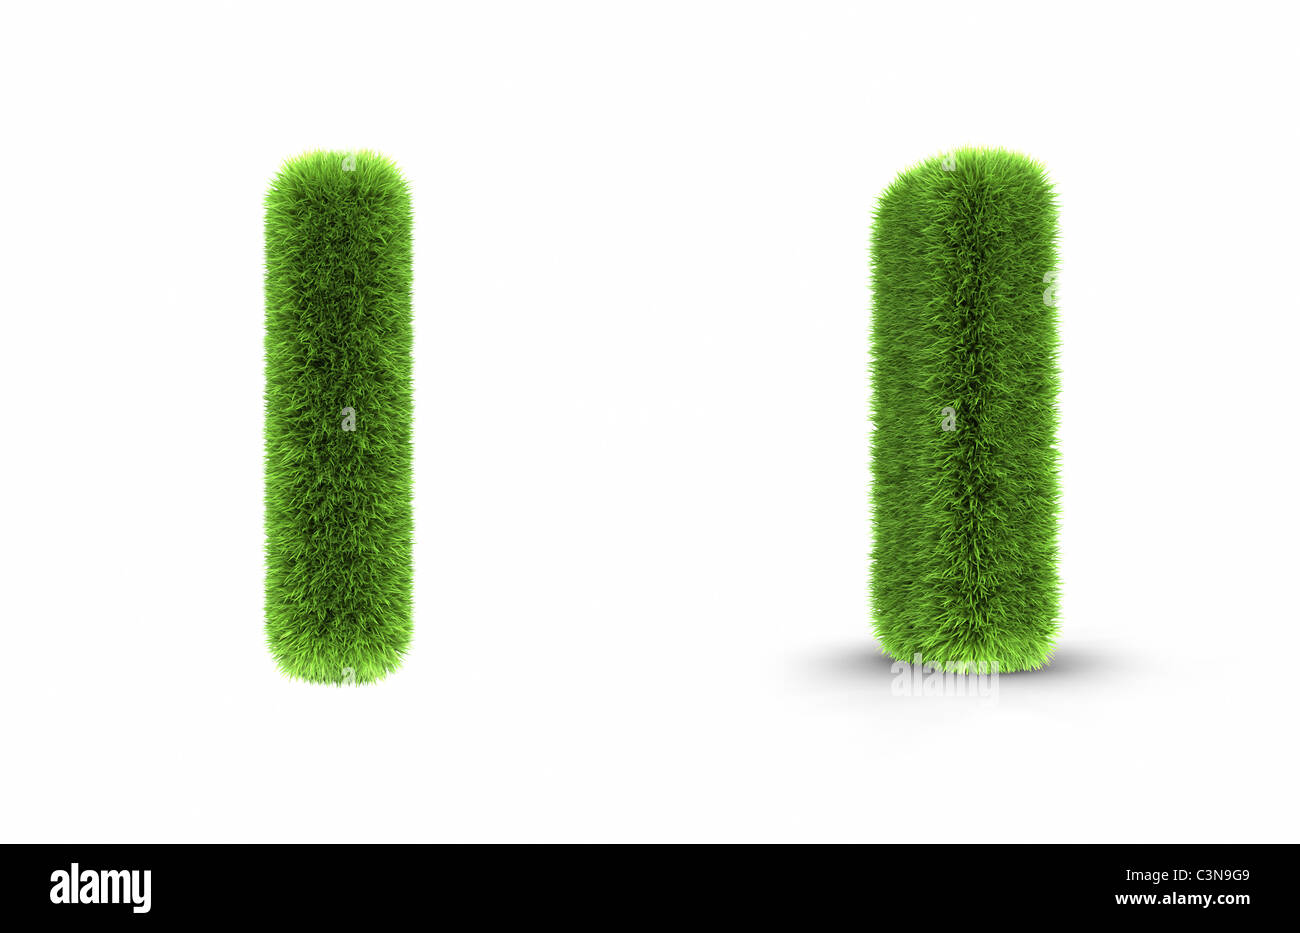 Grass letter i, isolated on white background Stock Photo